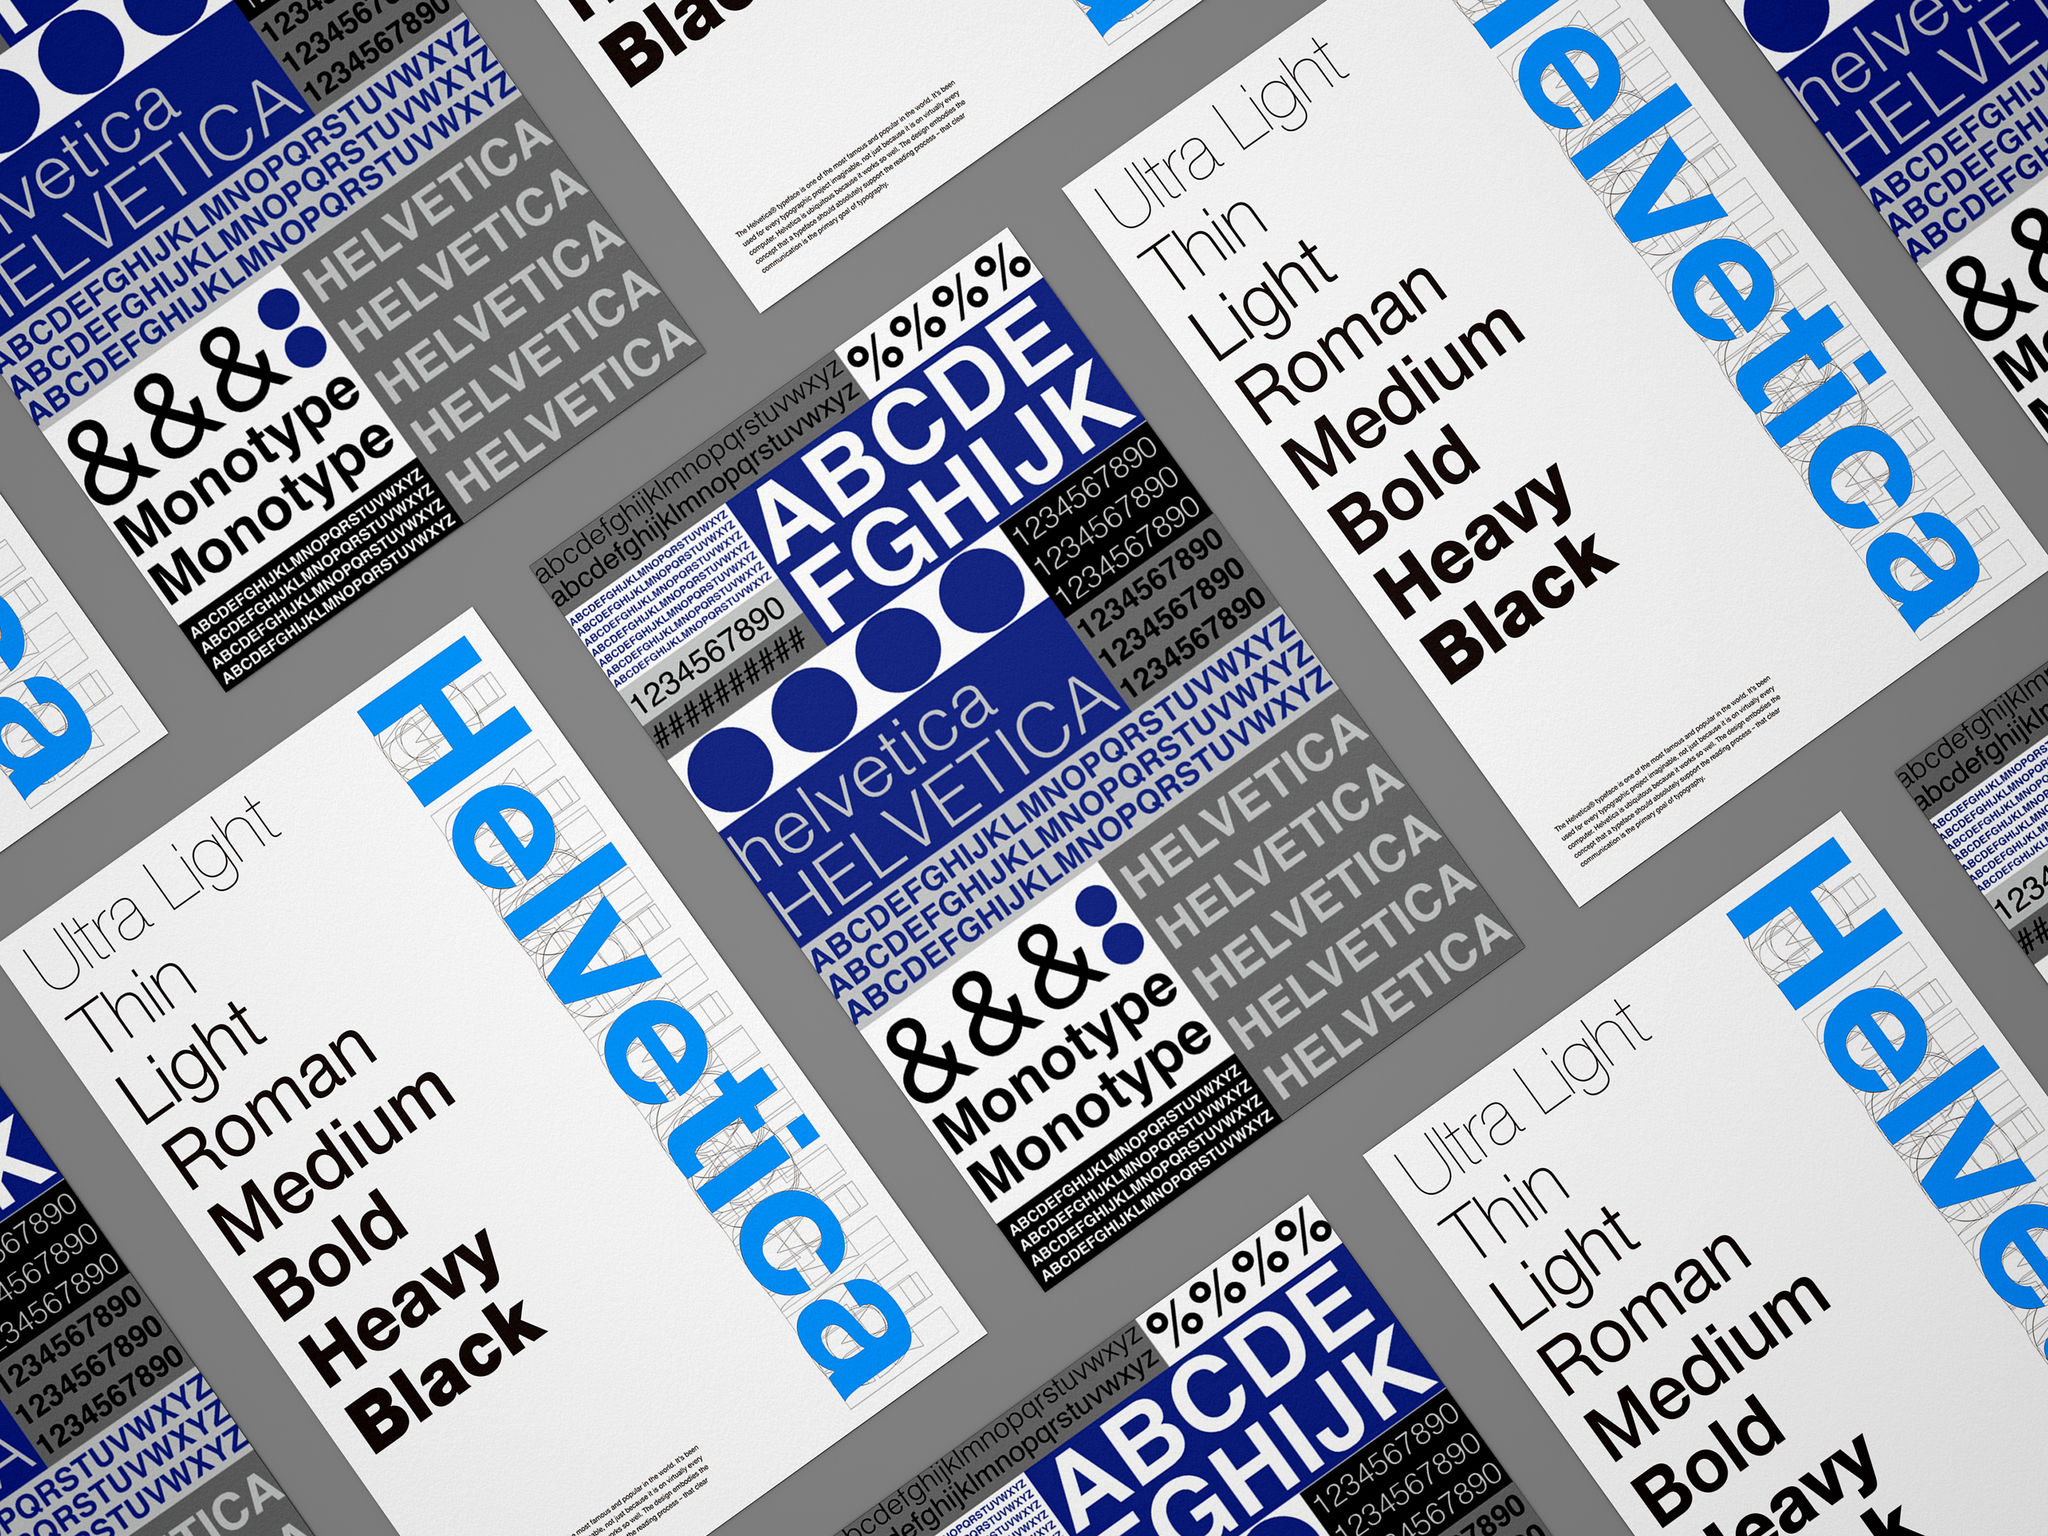 Posters of Monotype Helvetica now & DIN